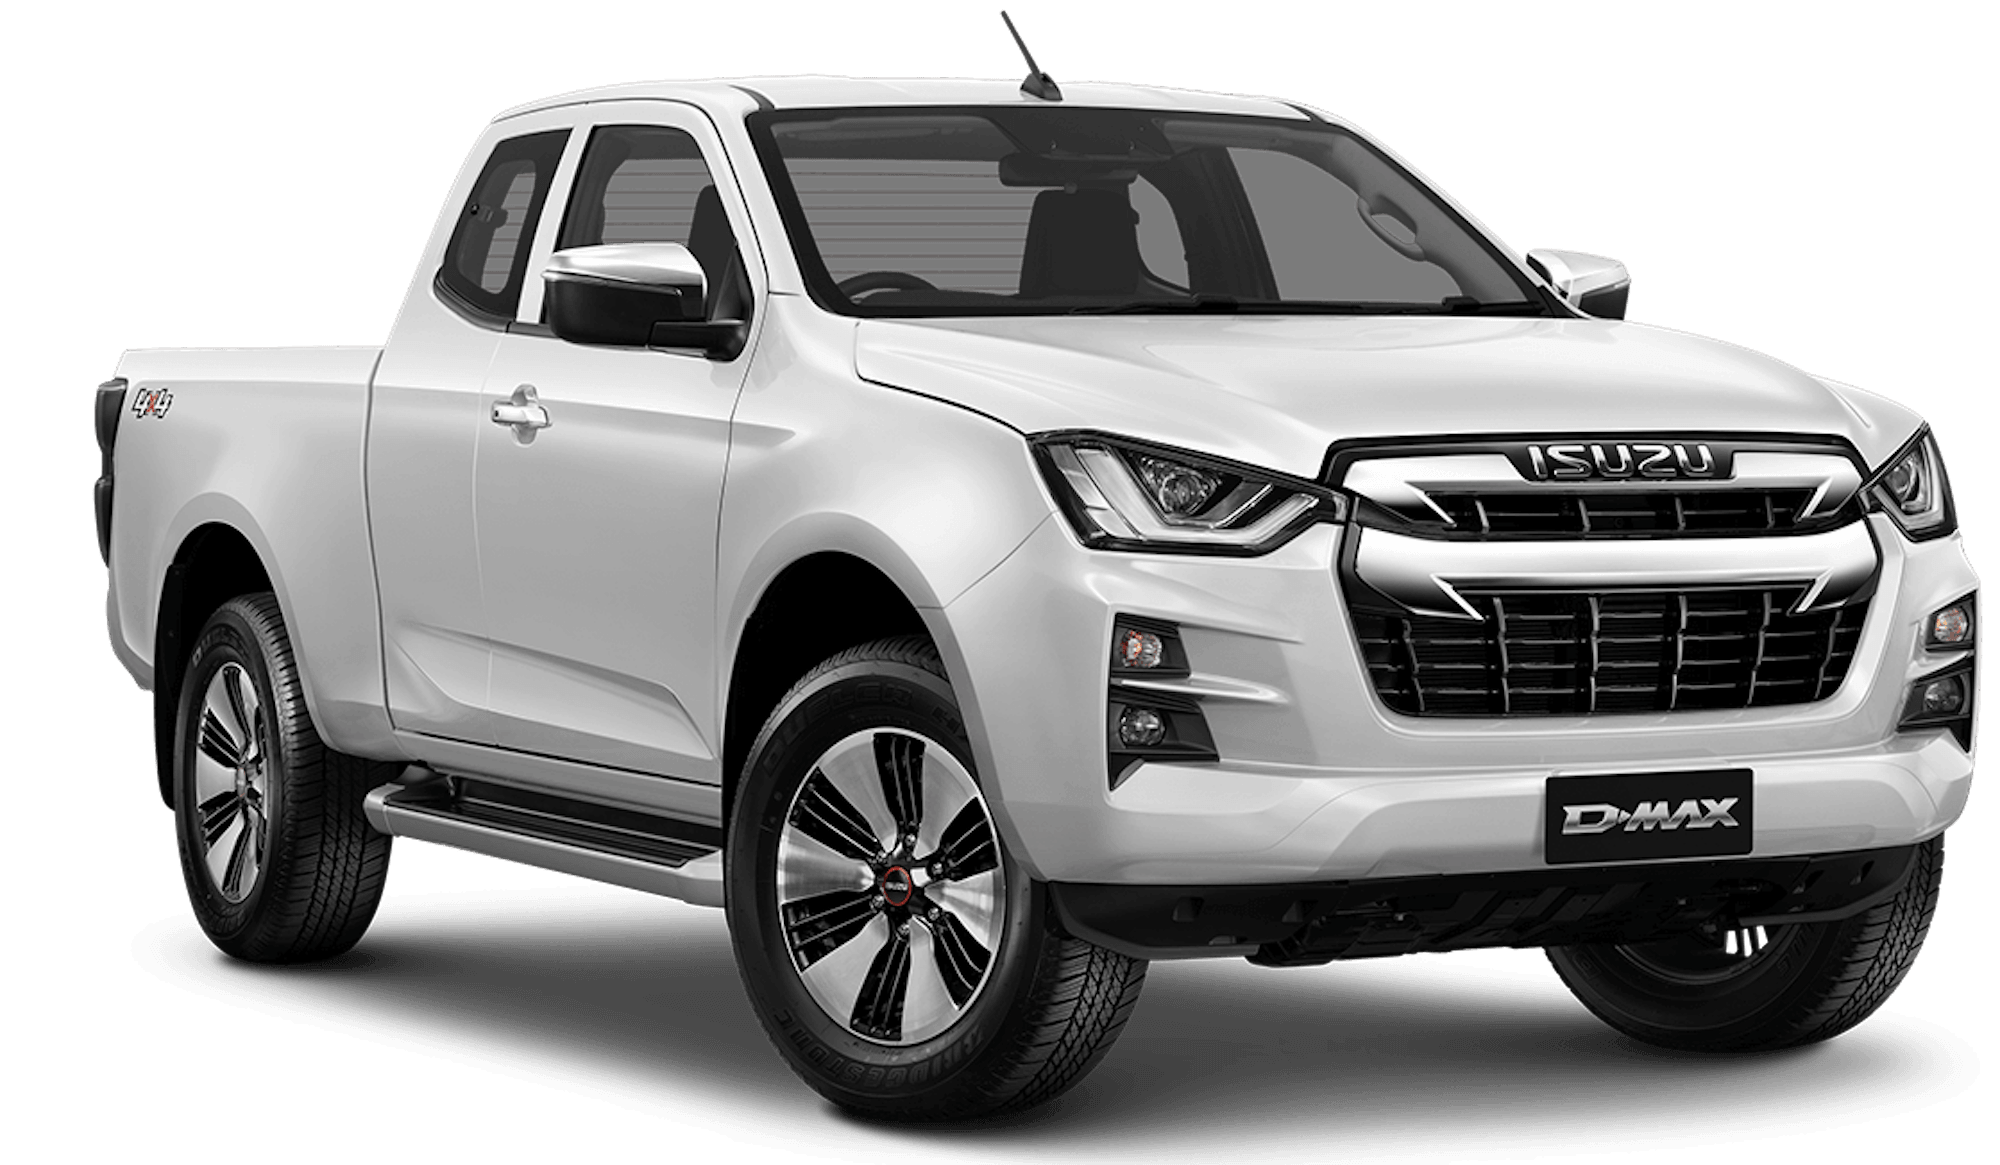 Find your best Isuzu D-Max finance rate with Driva